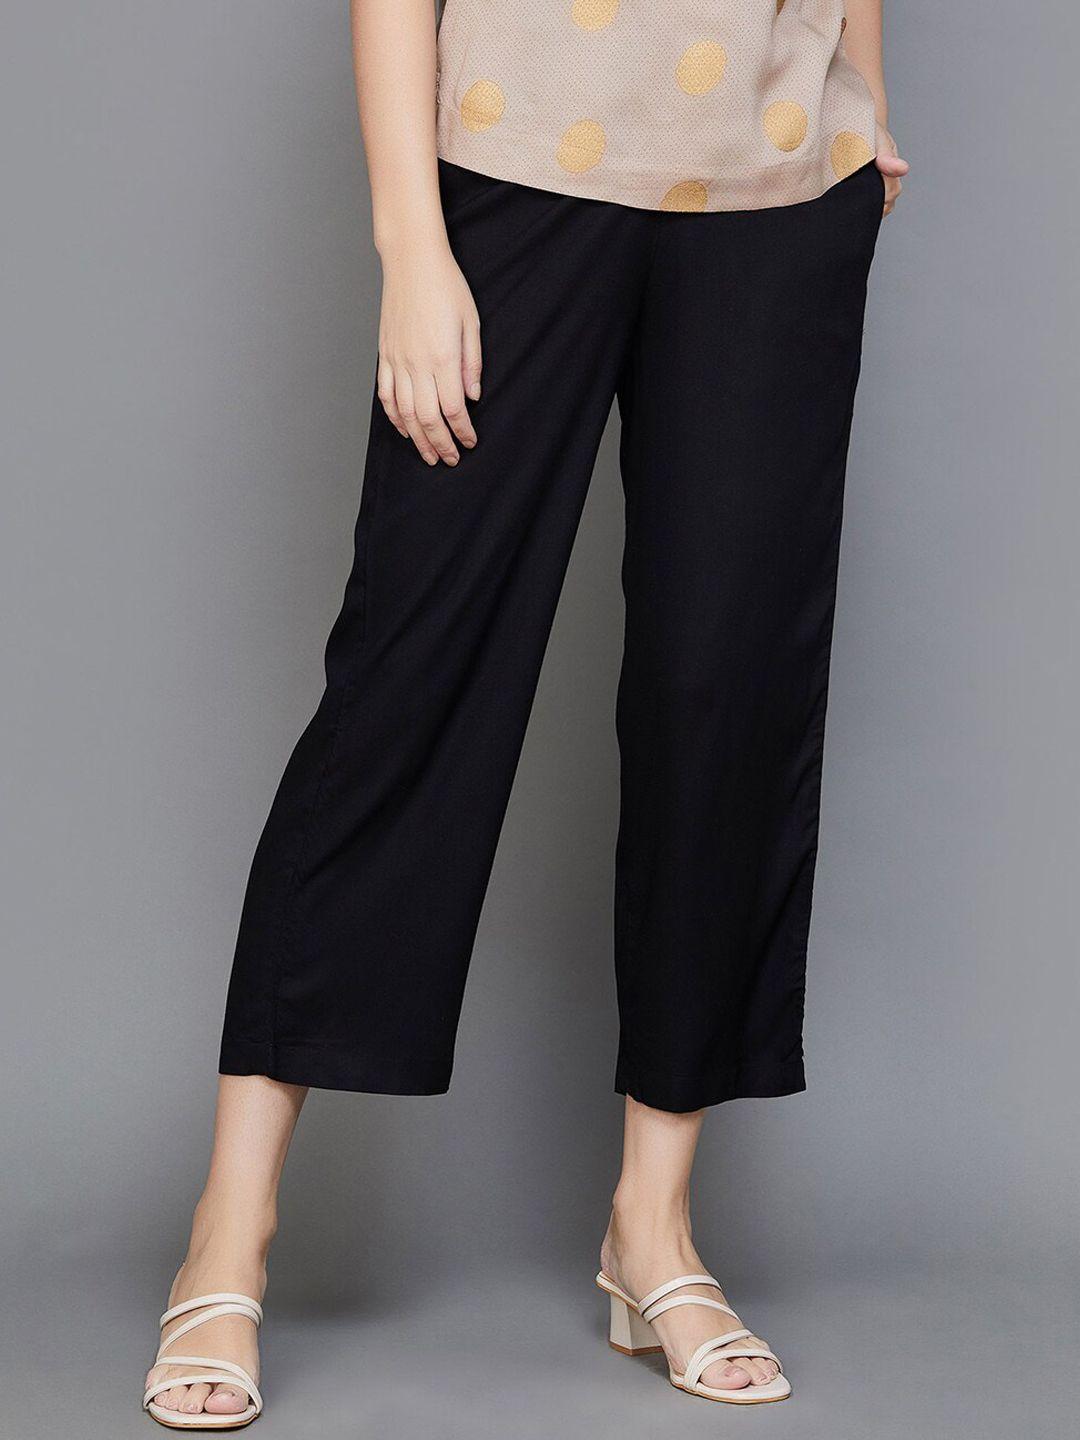 melange by lifestyle women mid-rise regular fit culottes trousers